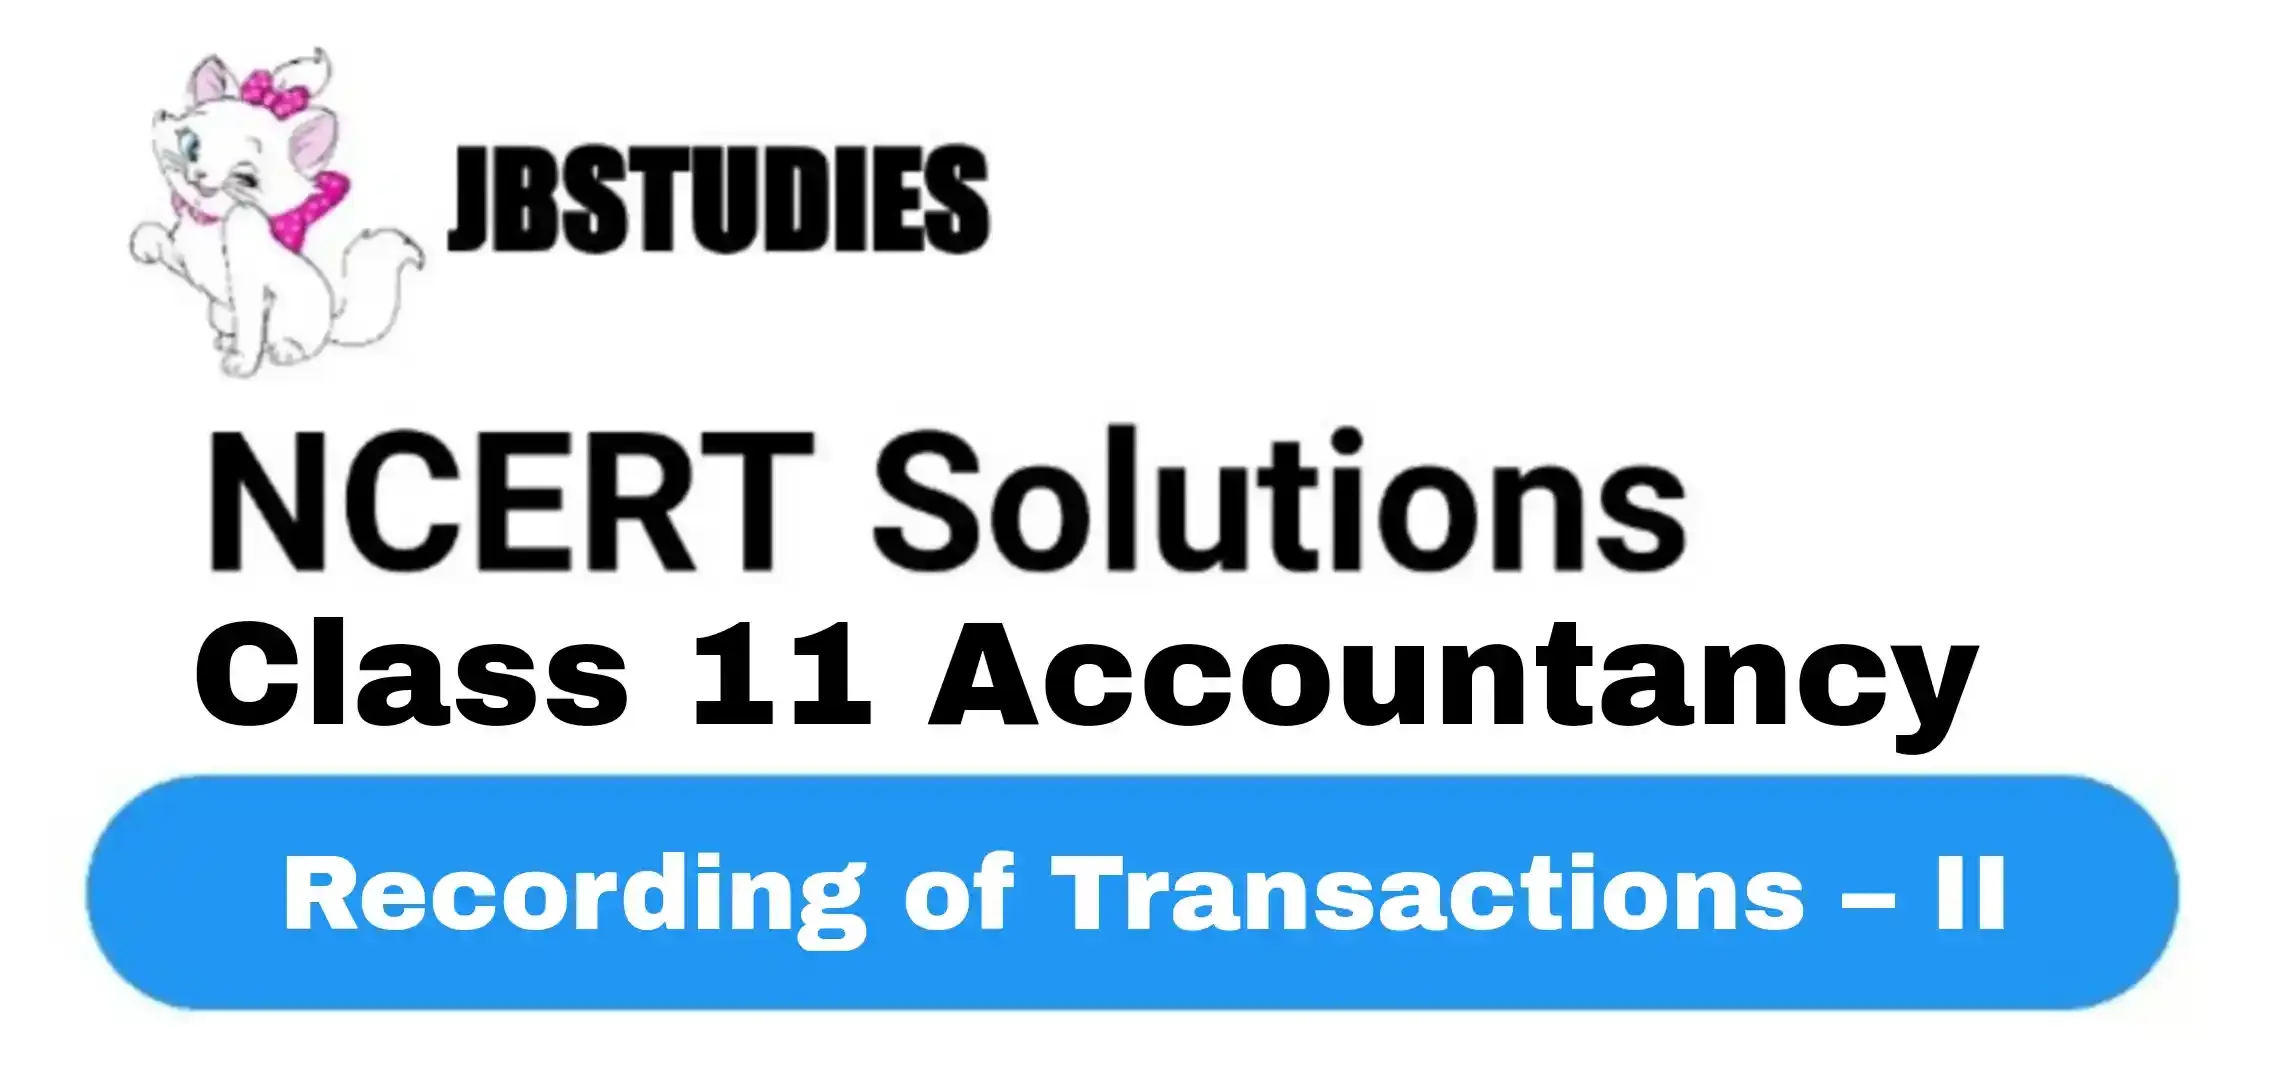 Solutions Class 11 Accountancy Chapter -4 (Recording of Transactions-II)